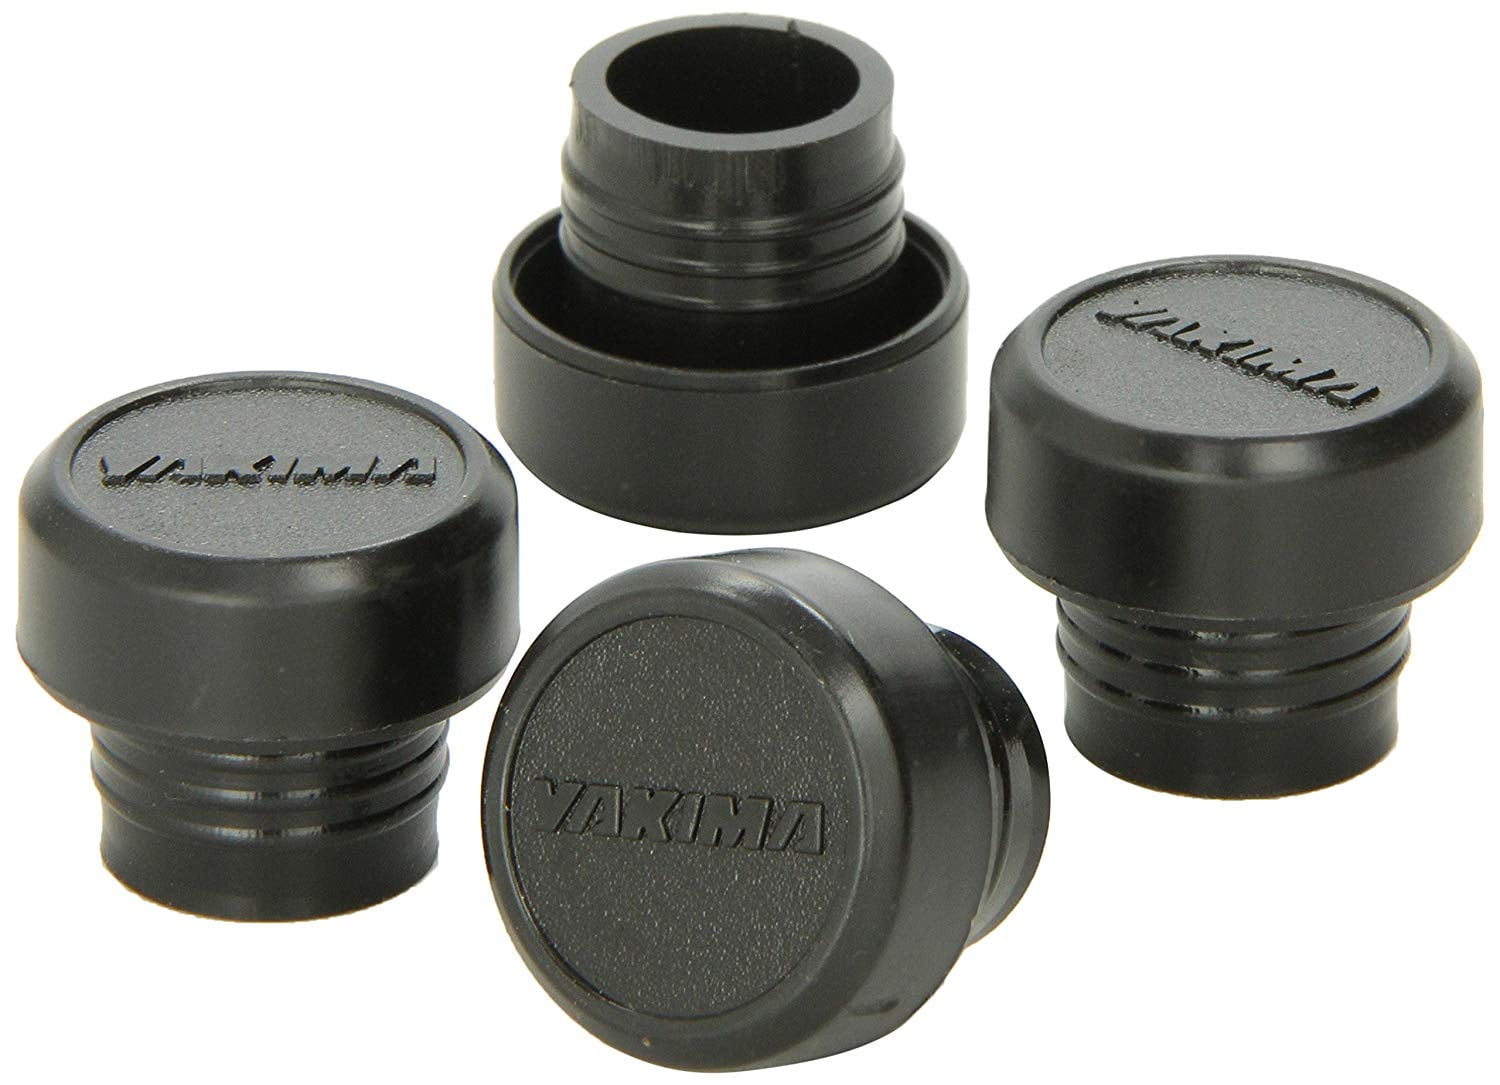 Strap Caps Spare Part for StrapThang Roof Rack Tie Down YAKIMA Set of 4